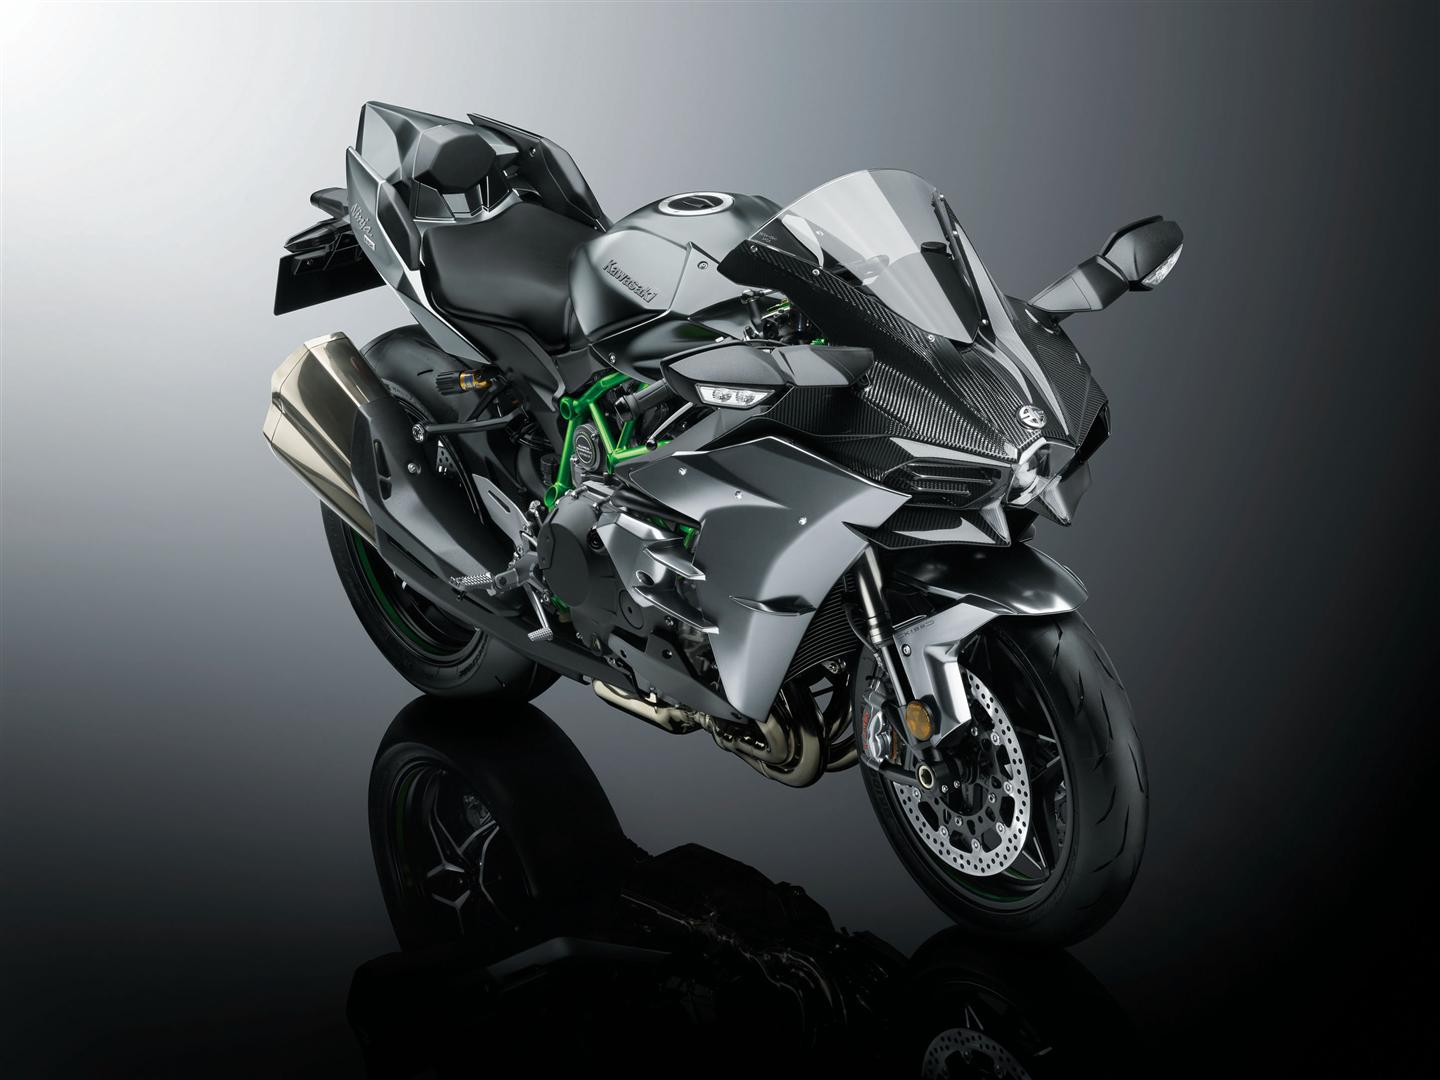 Only Six 2017 Kawasaki Carbon Units To Be Sold The U.S. - autoevolution